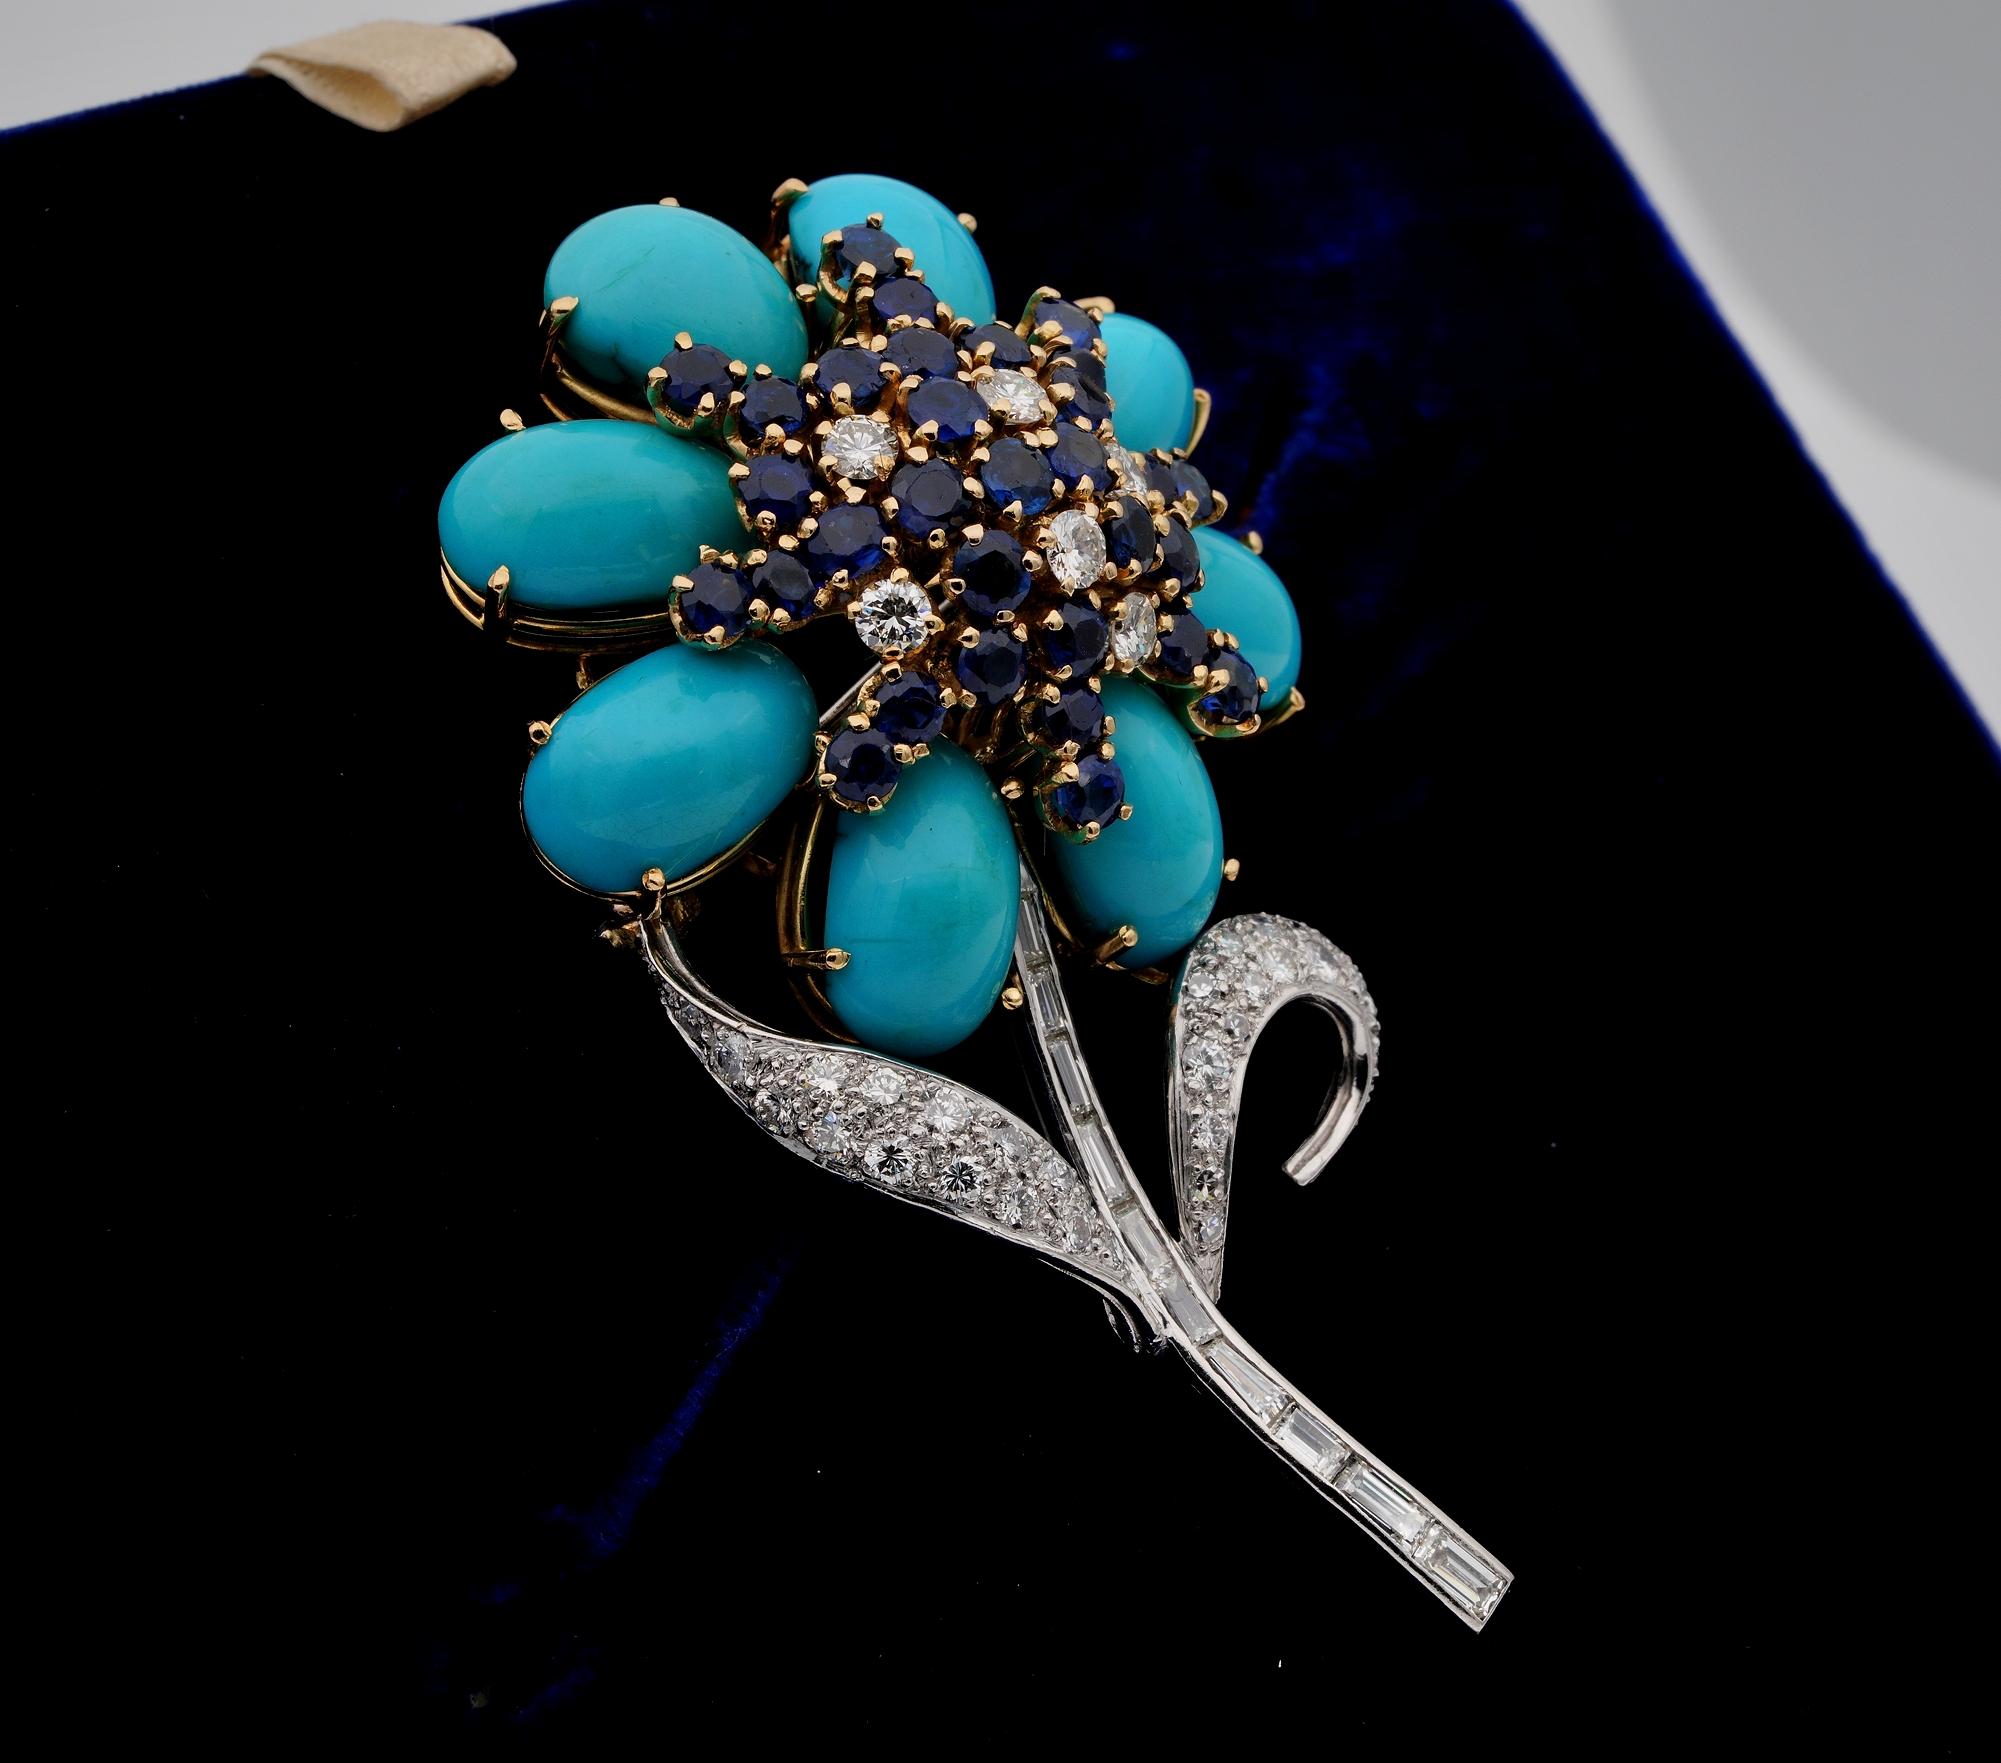 Cabochon Remarkable Midcentury Persian Turquoise Diamond Sapphire Flower Brooch For Sale